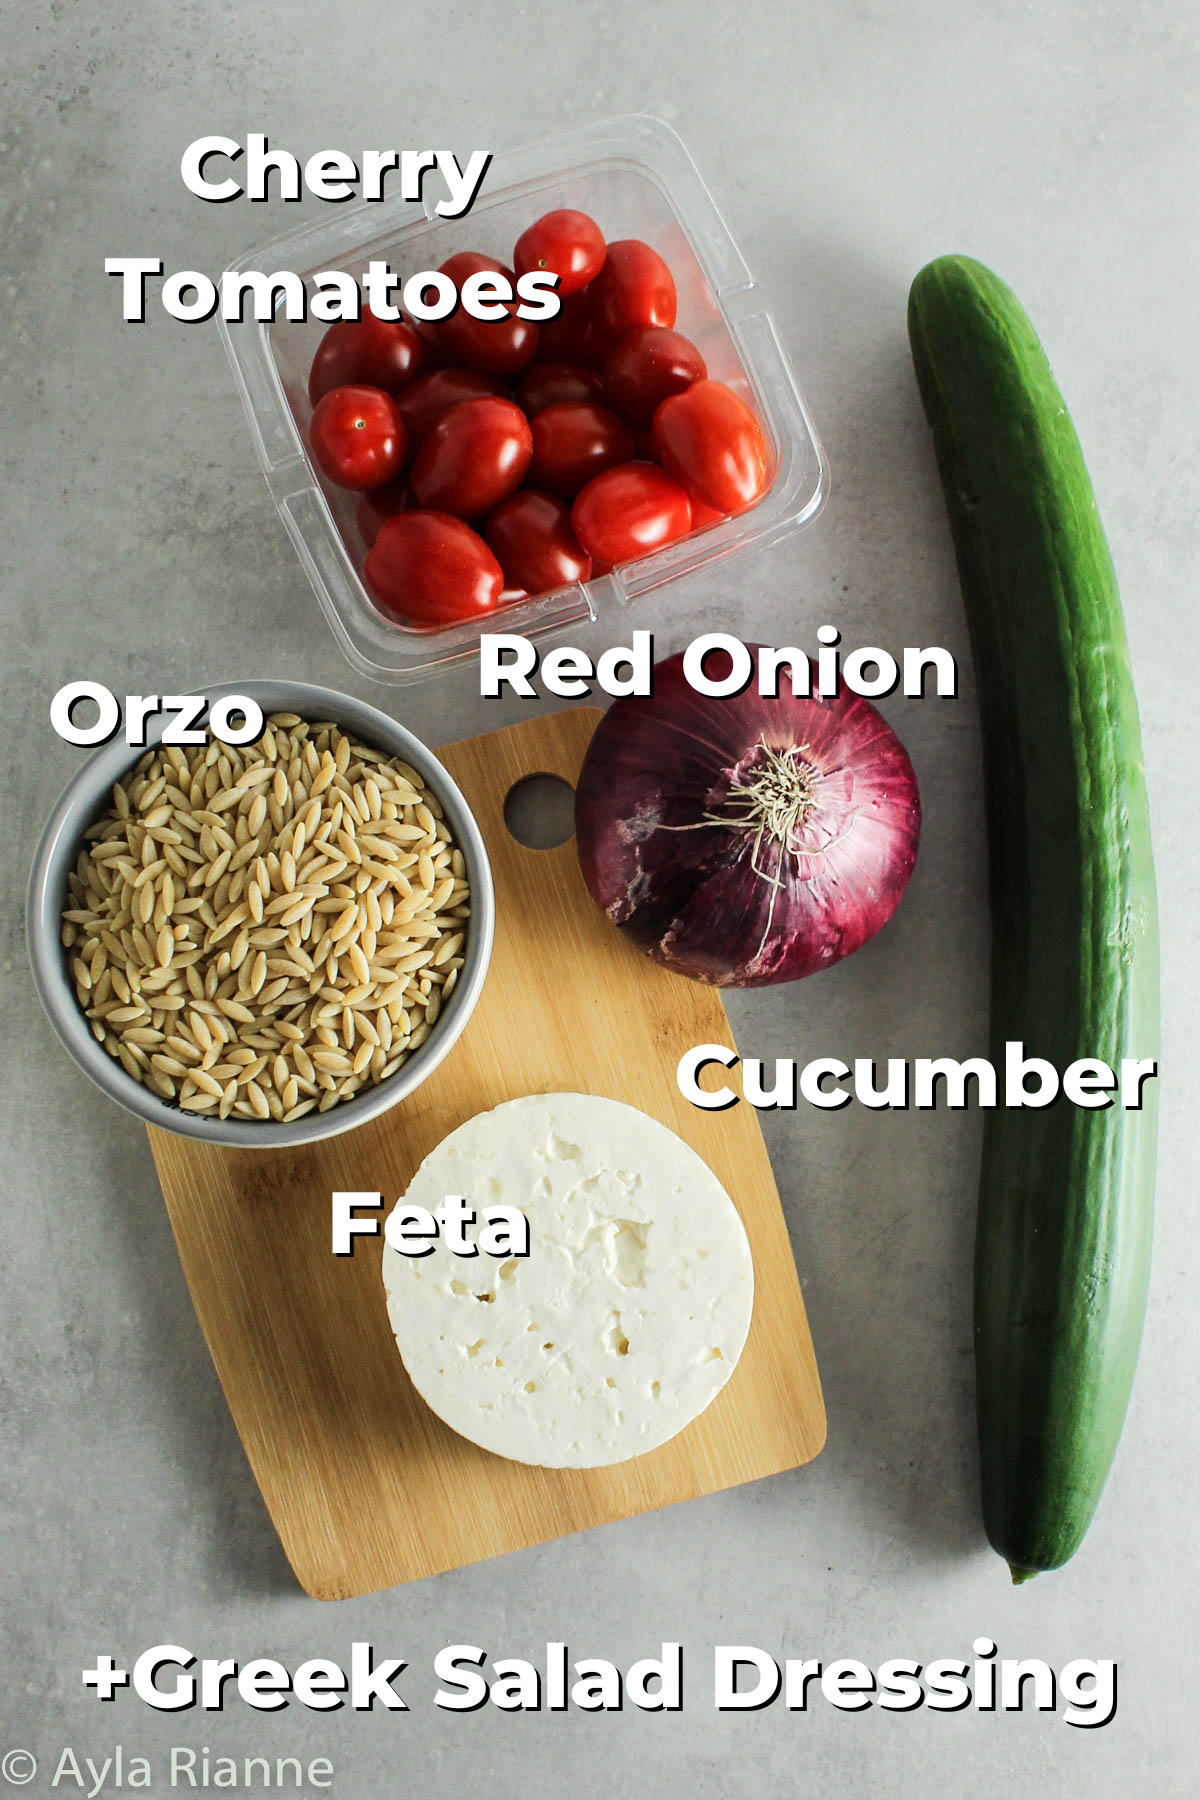 ingredients for greek orzo pasta salad on a counter including cherry tomatoes, red onion, cucumber, feta, and orzo